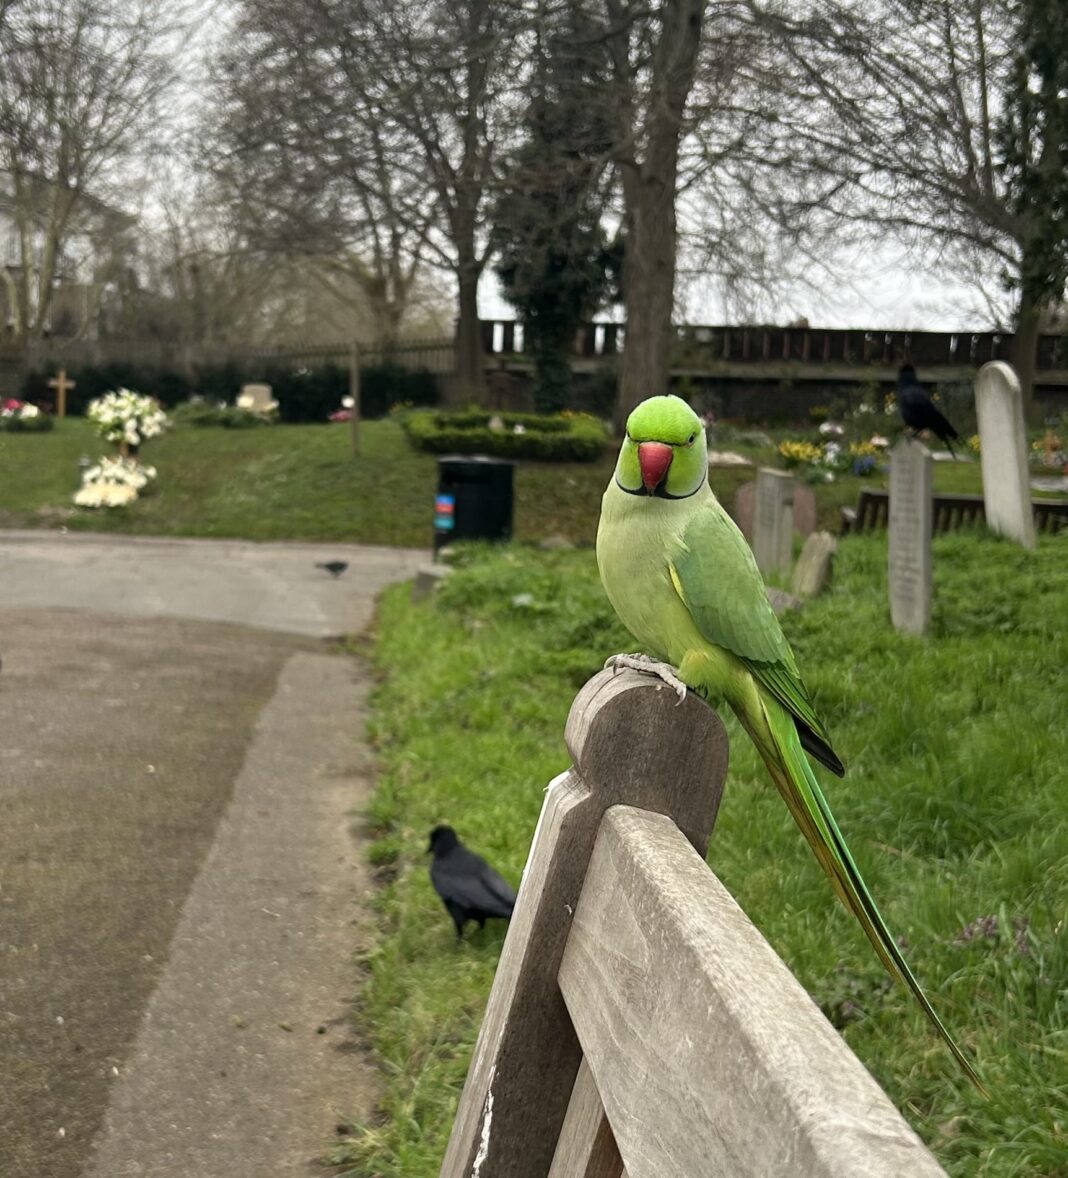 Between 8,000 and 10,000 parakeets are living in the Belgian city of Brussels. These colourful birds are clearly not native to the region or continent, but they have settled in a place in Brussels